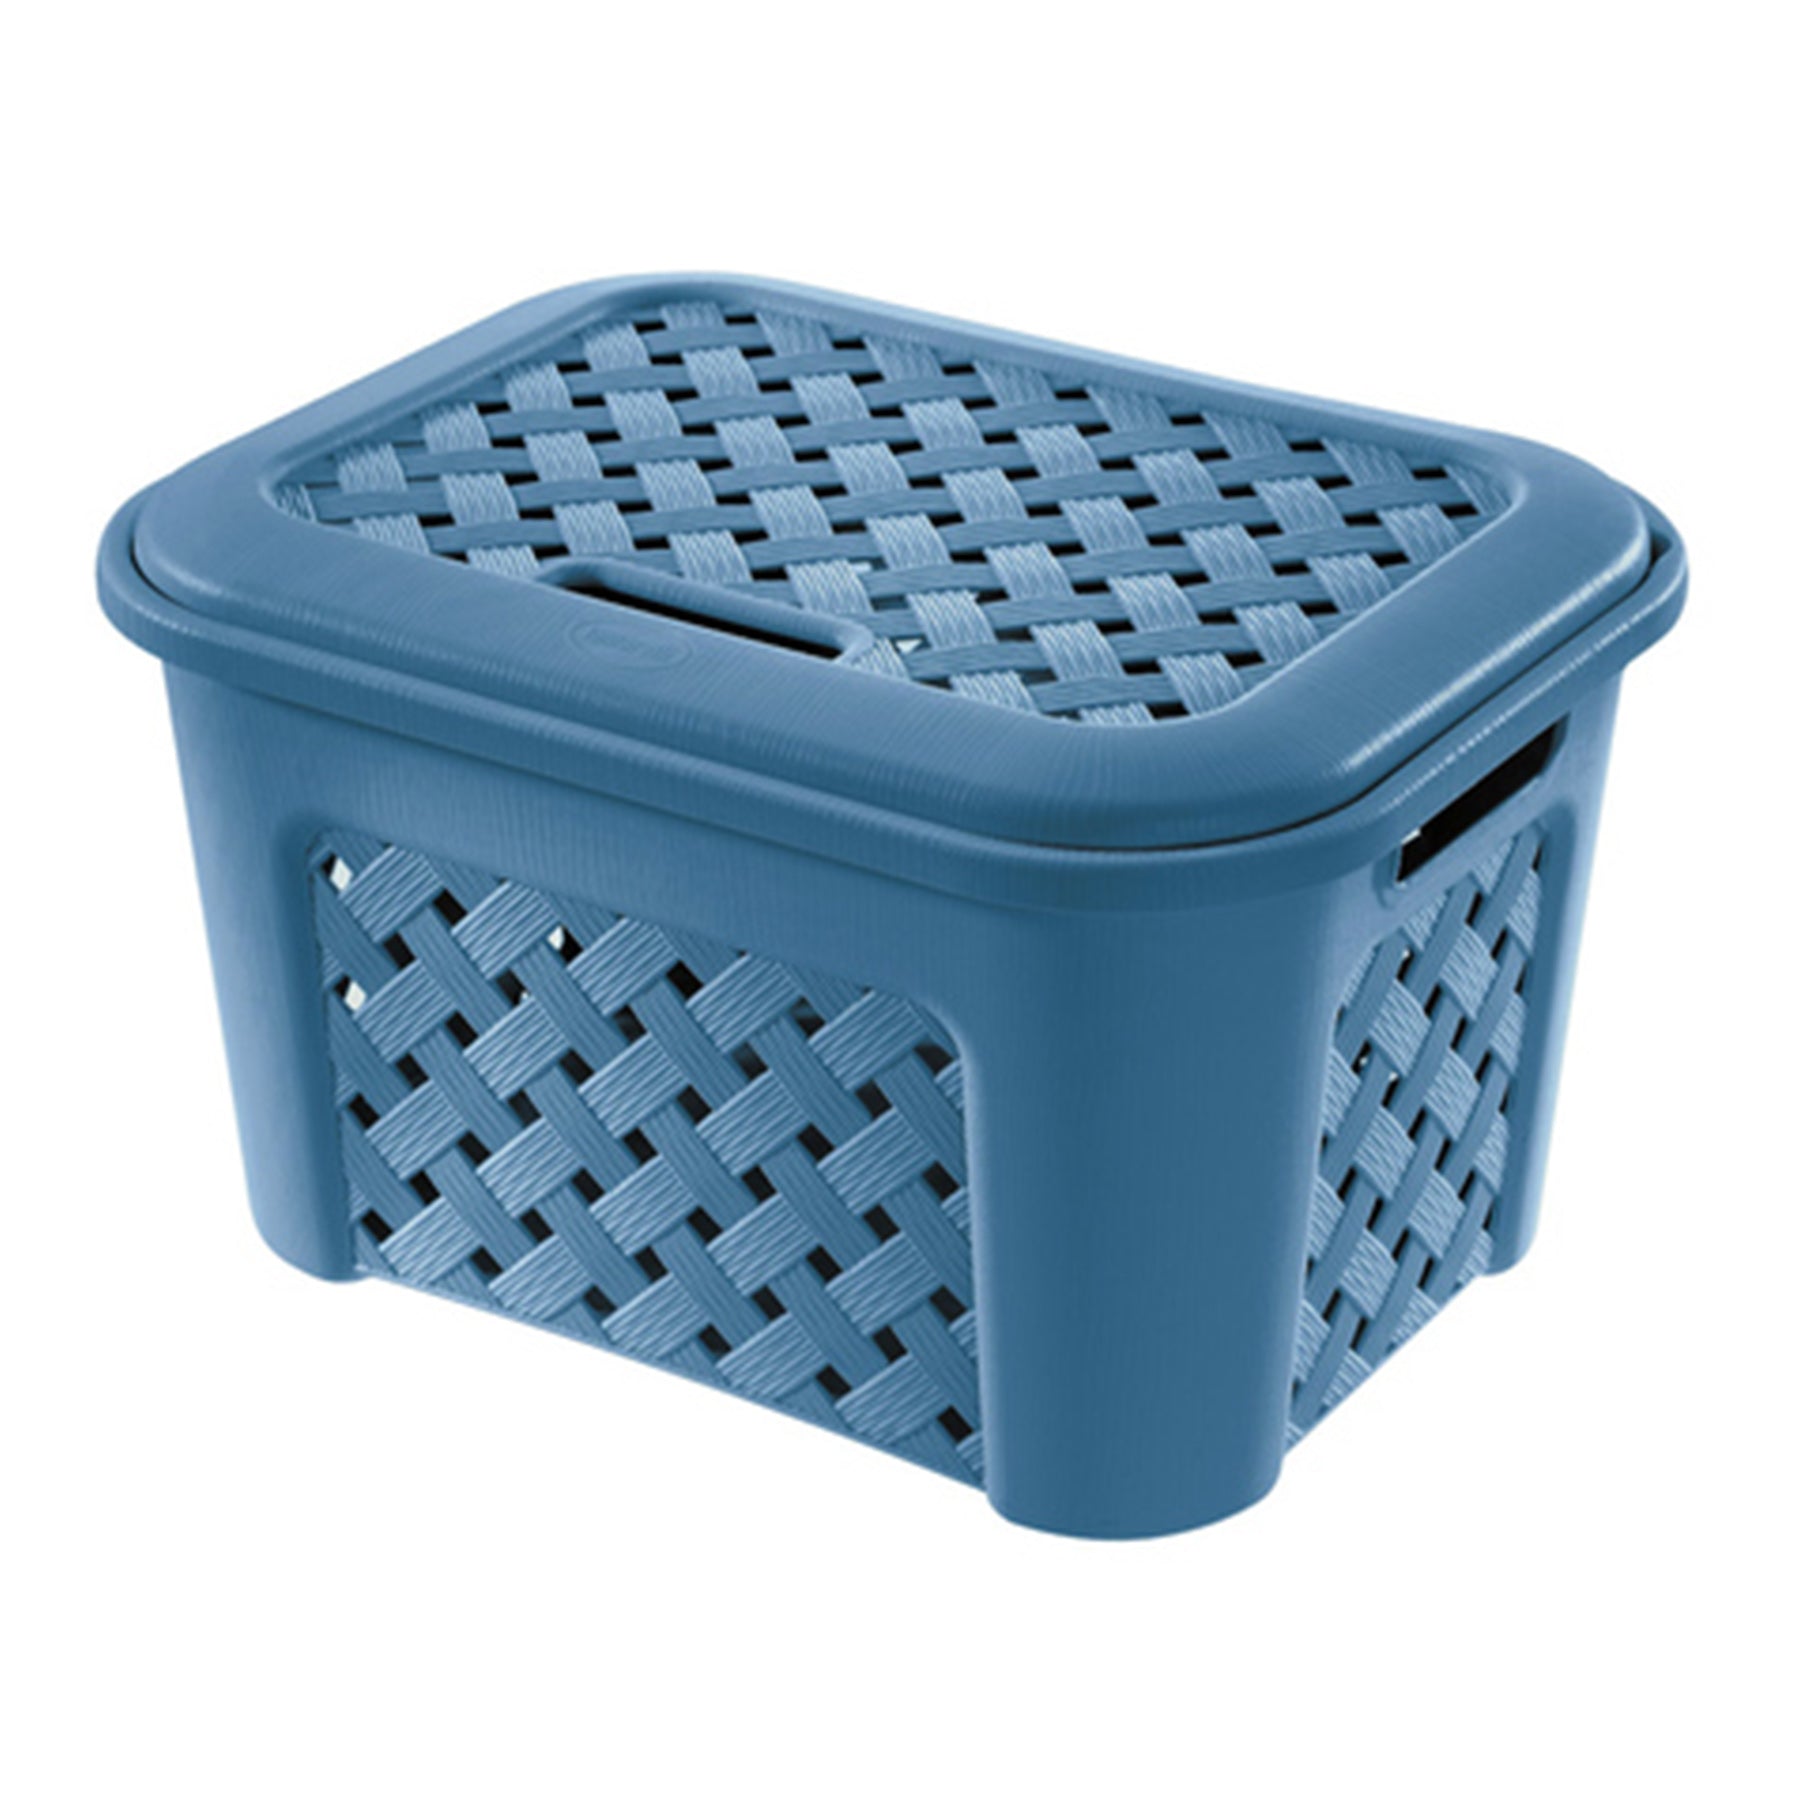 Laundry basket with lid Size: 43.5 x 33.5 x H26 cm